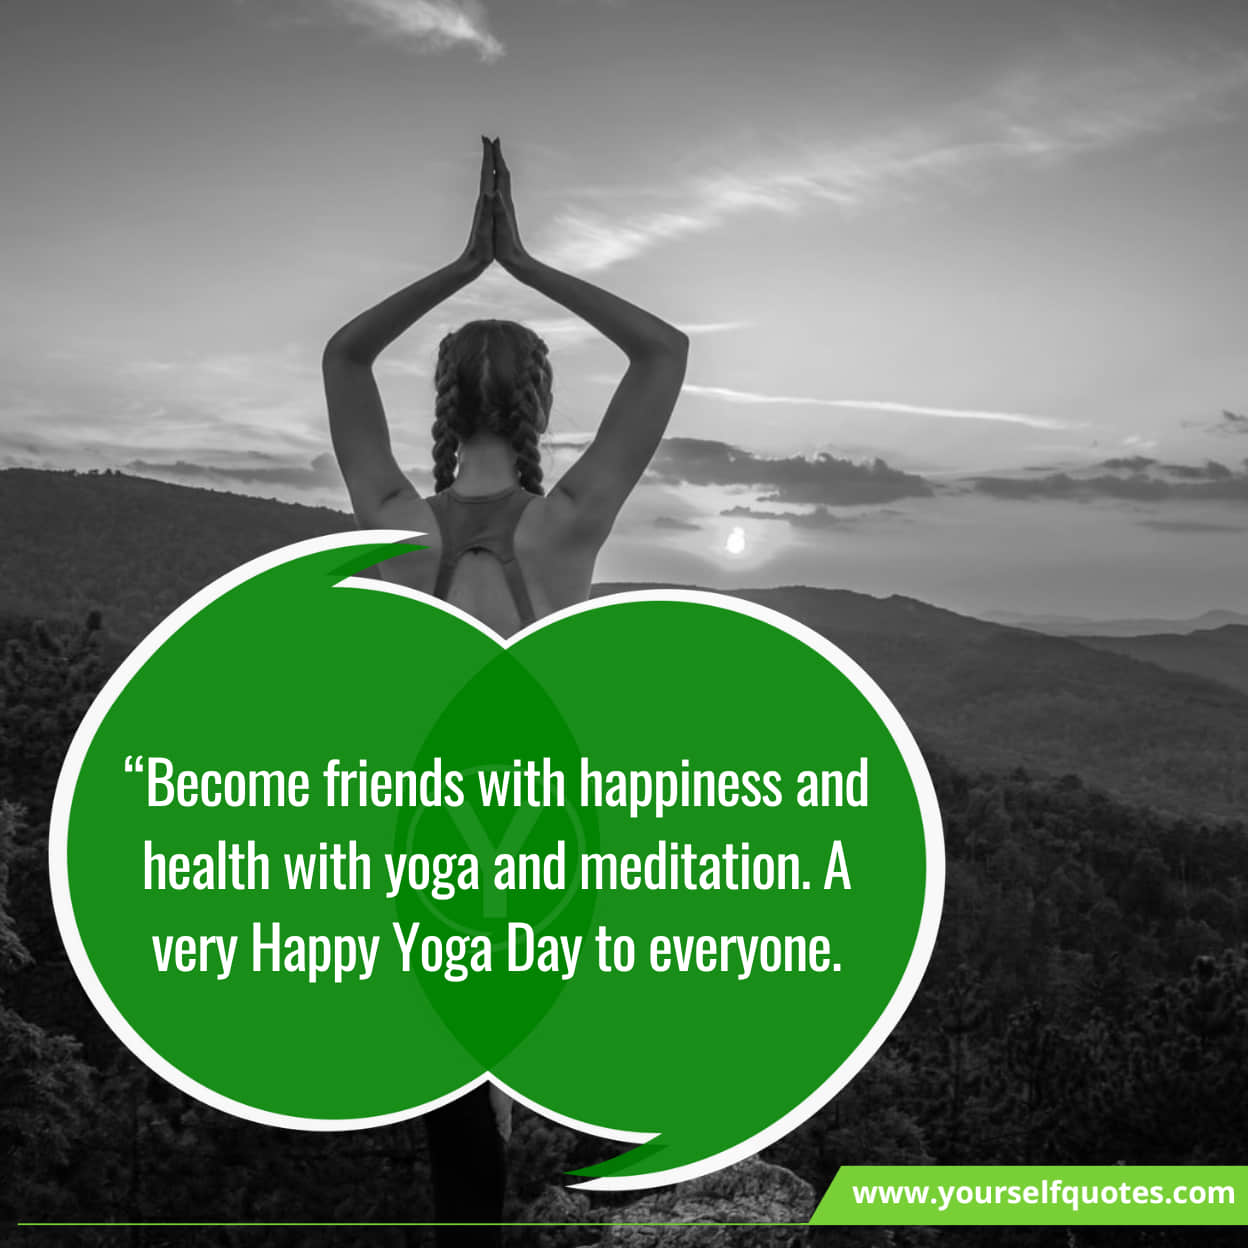 Yoga Day Quotes For Happiness 